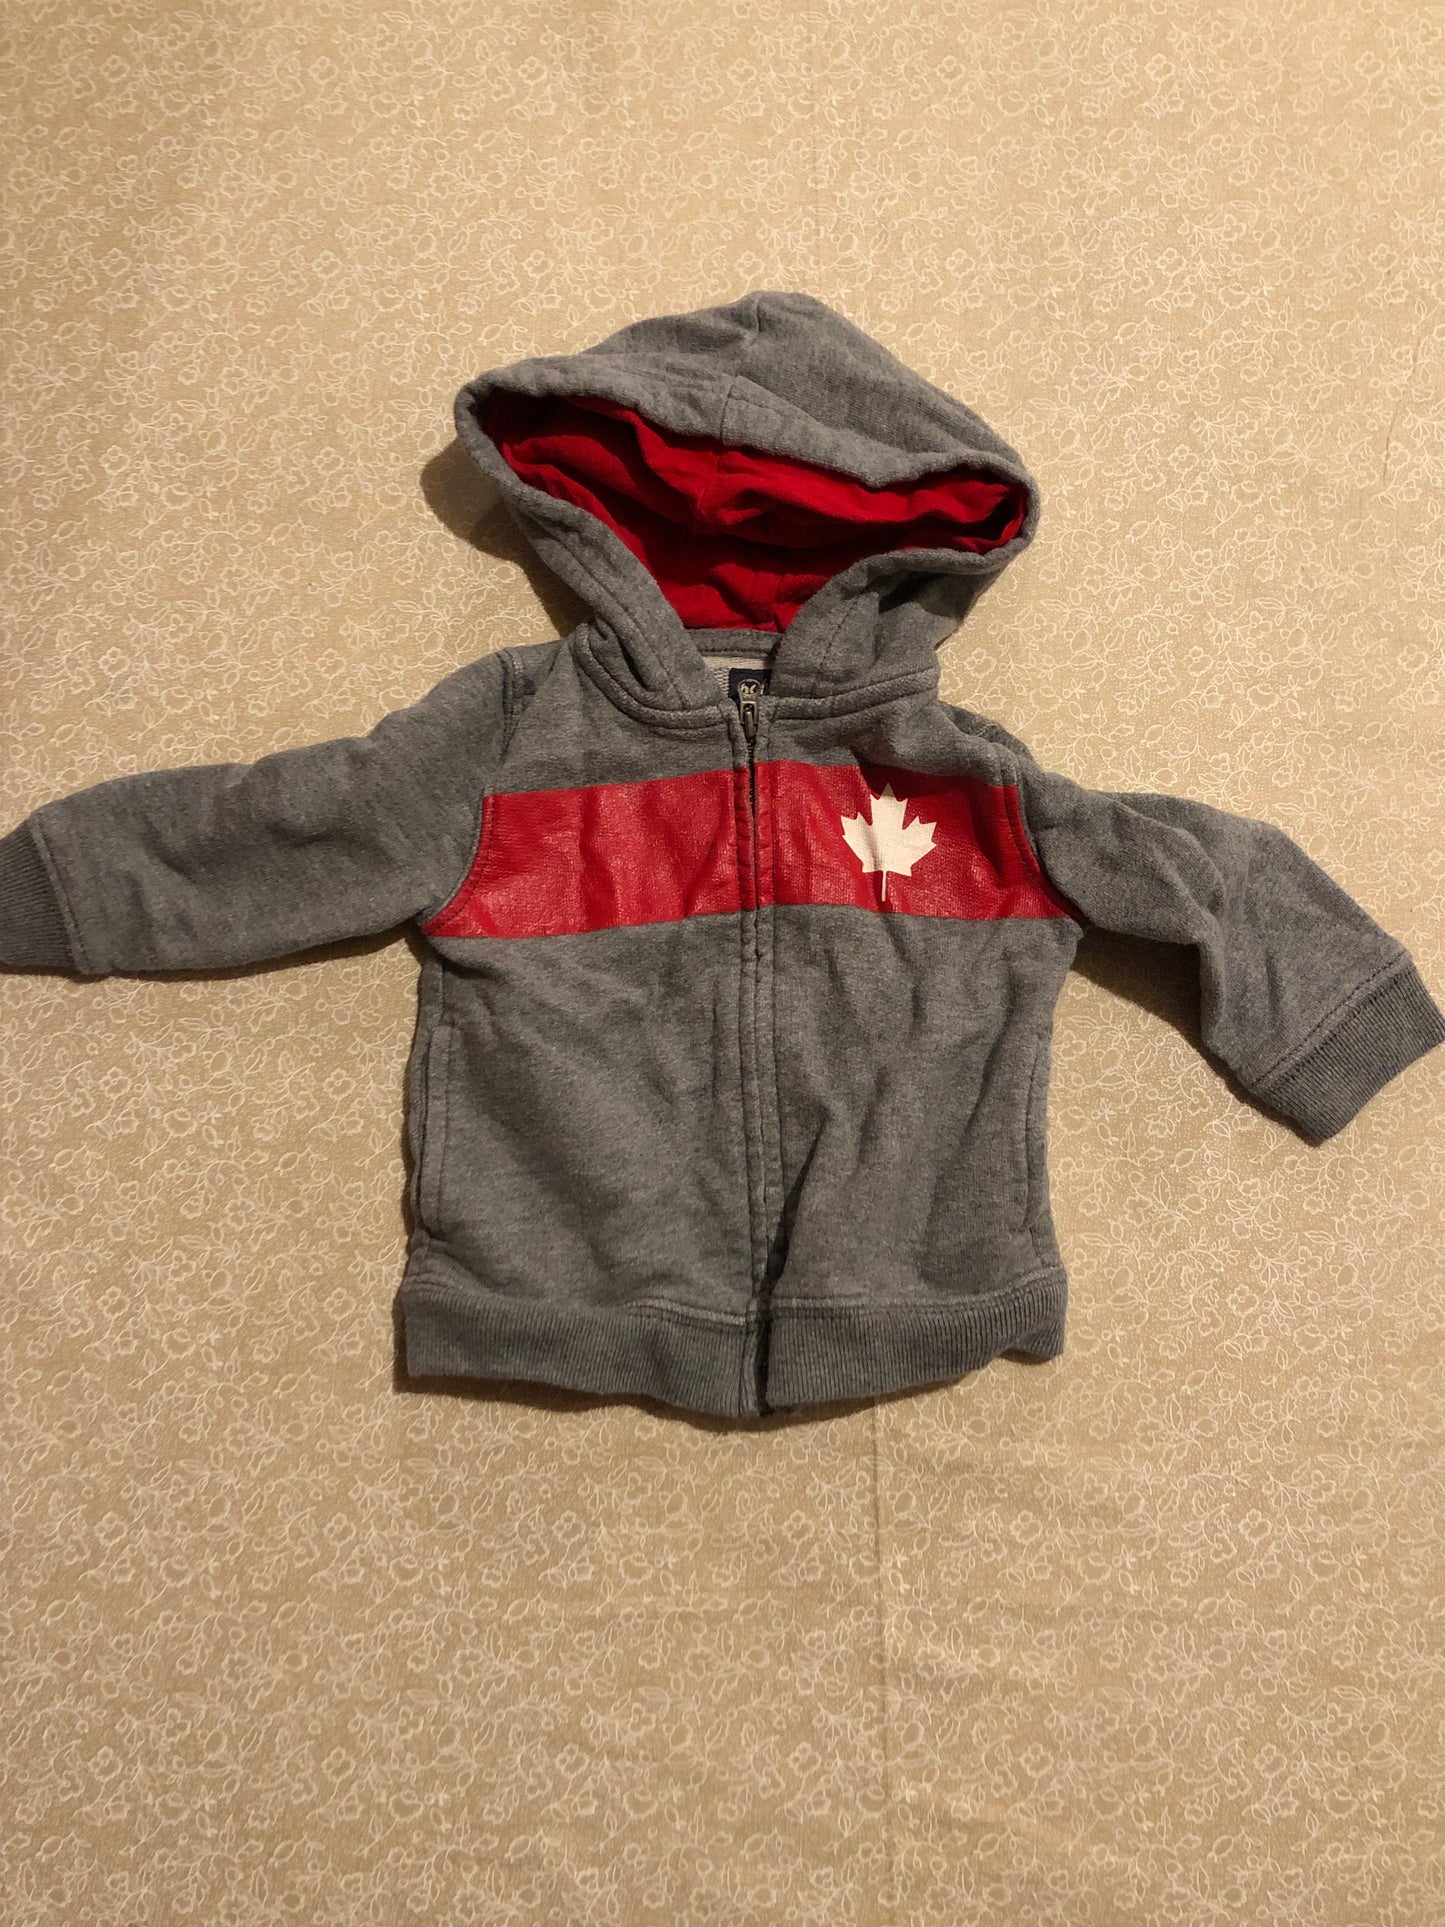 9-months-sweaters-baby-bgosh-grey-red-canada